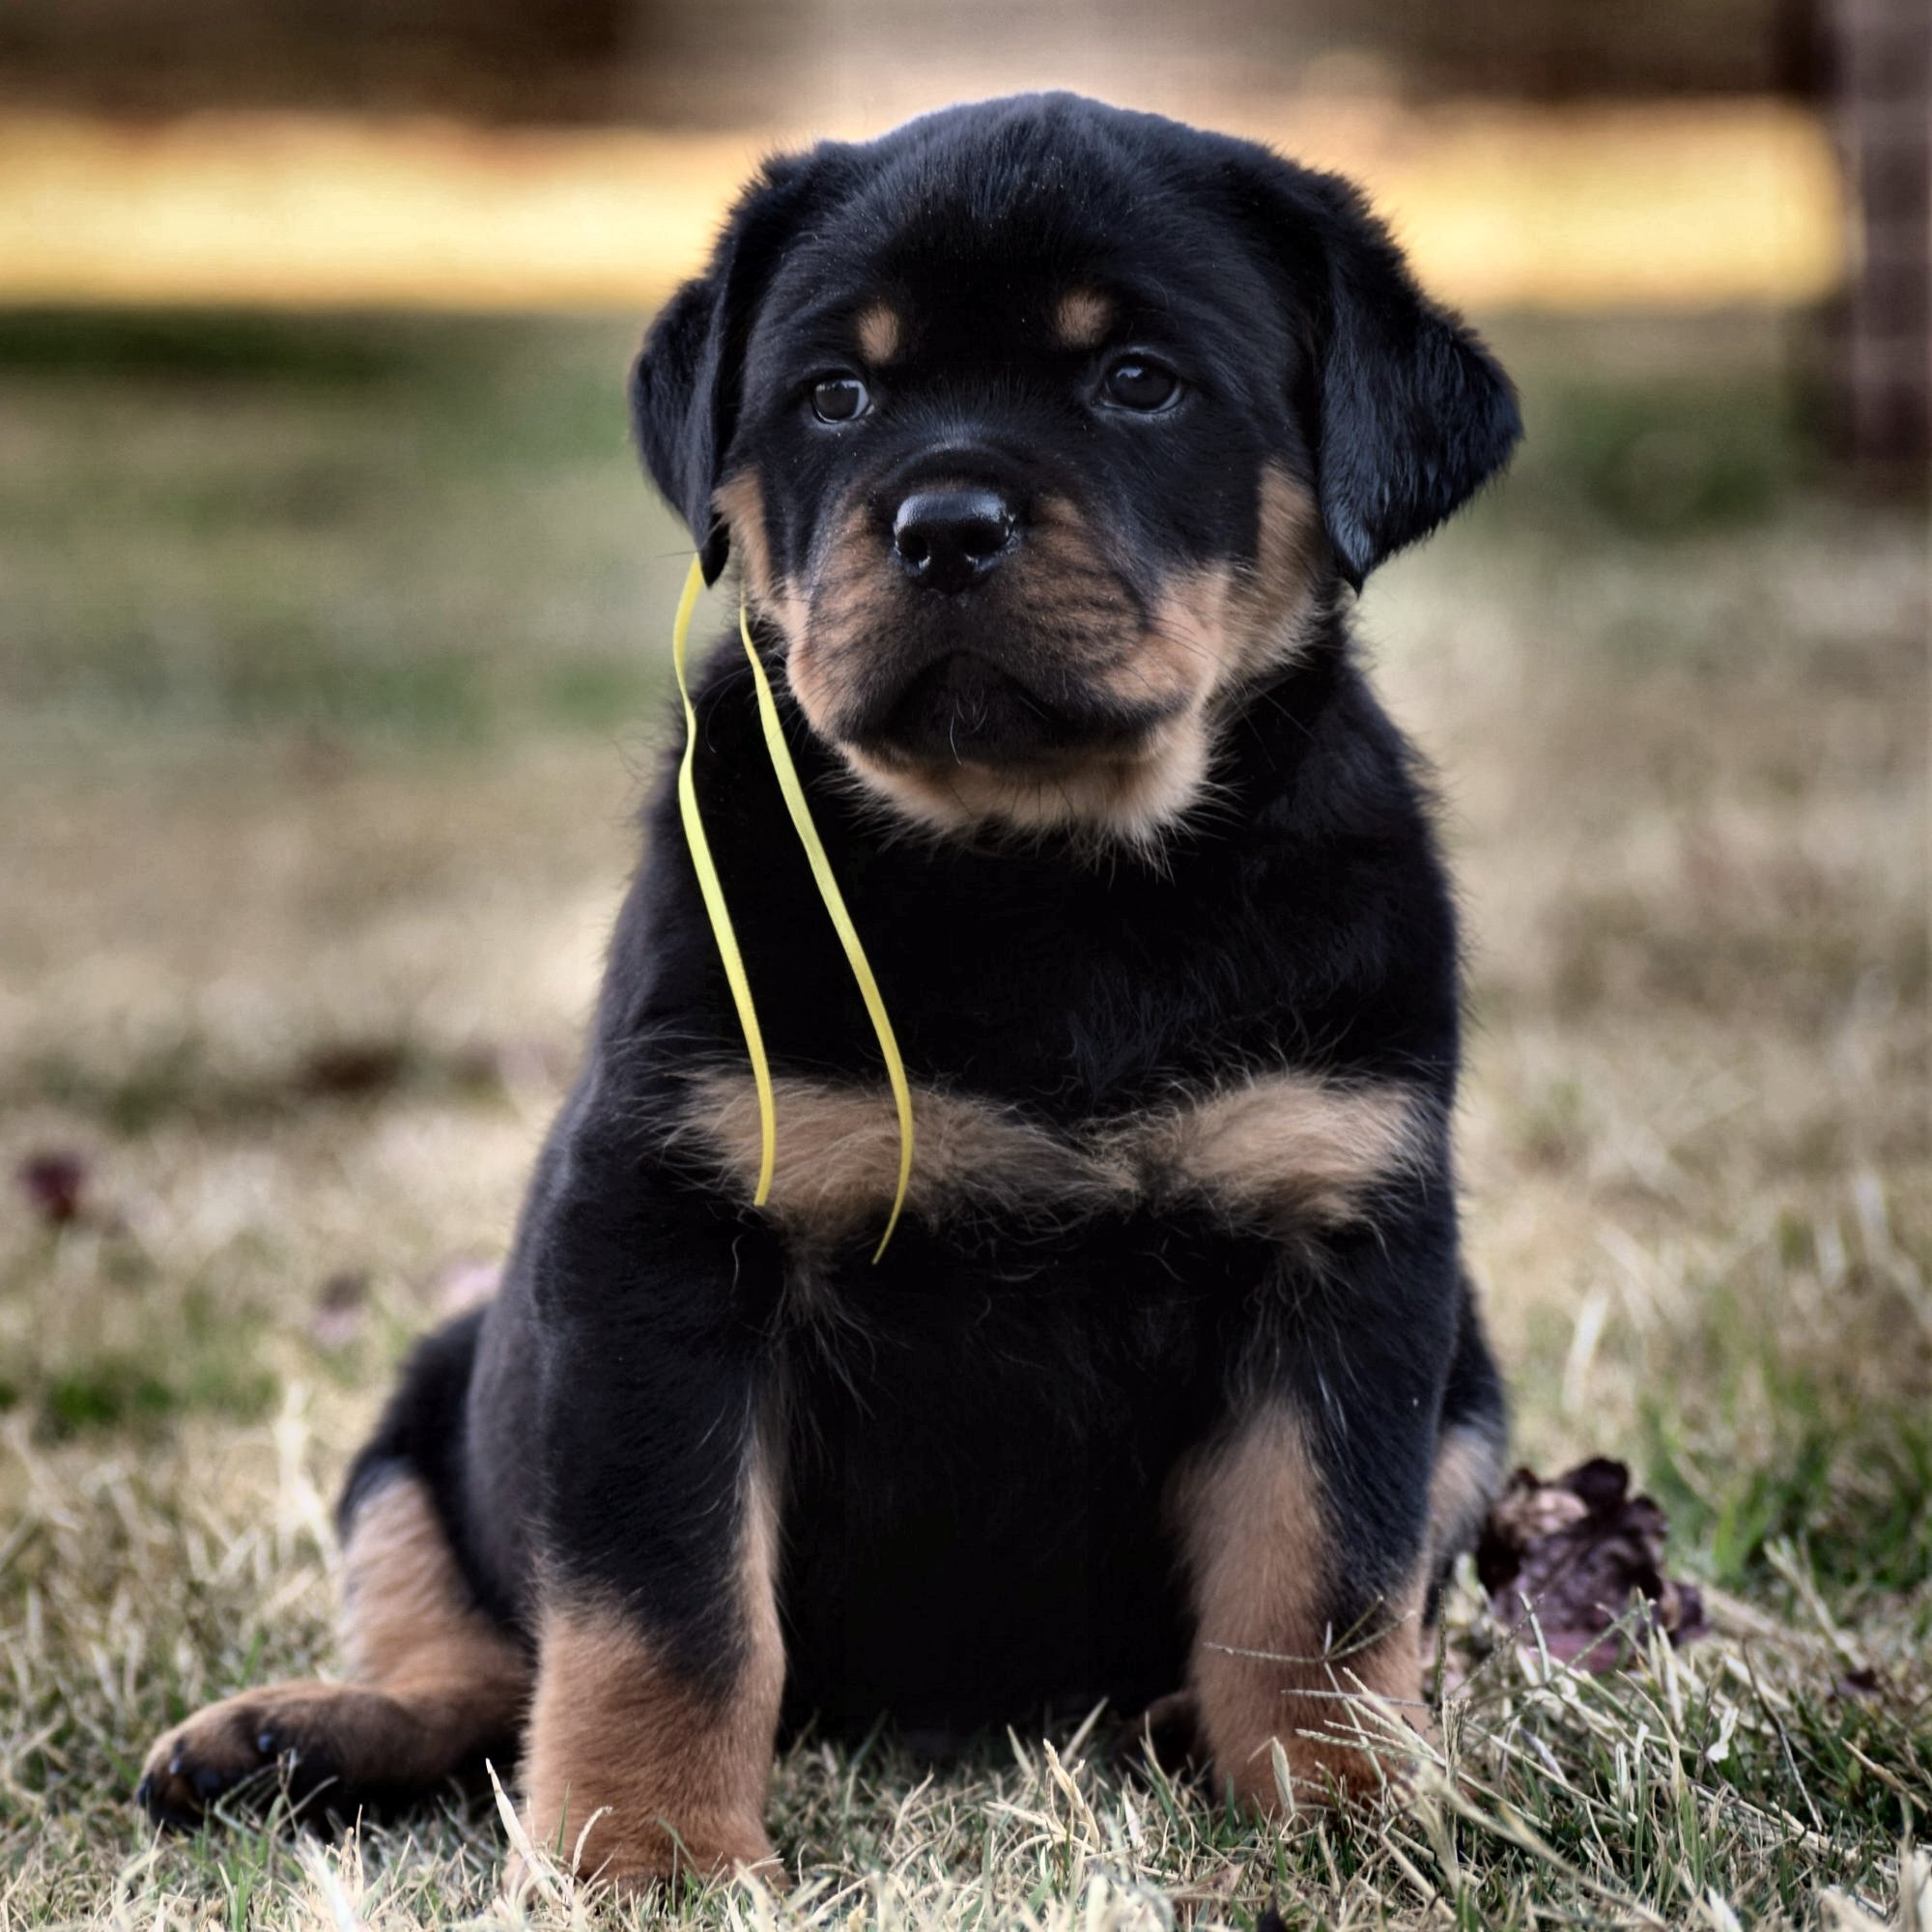 How Many Puppies Are In A Rottweiler Litter